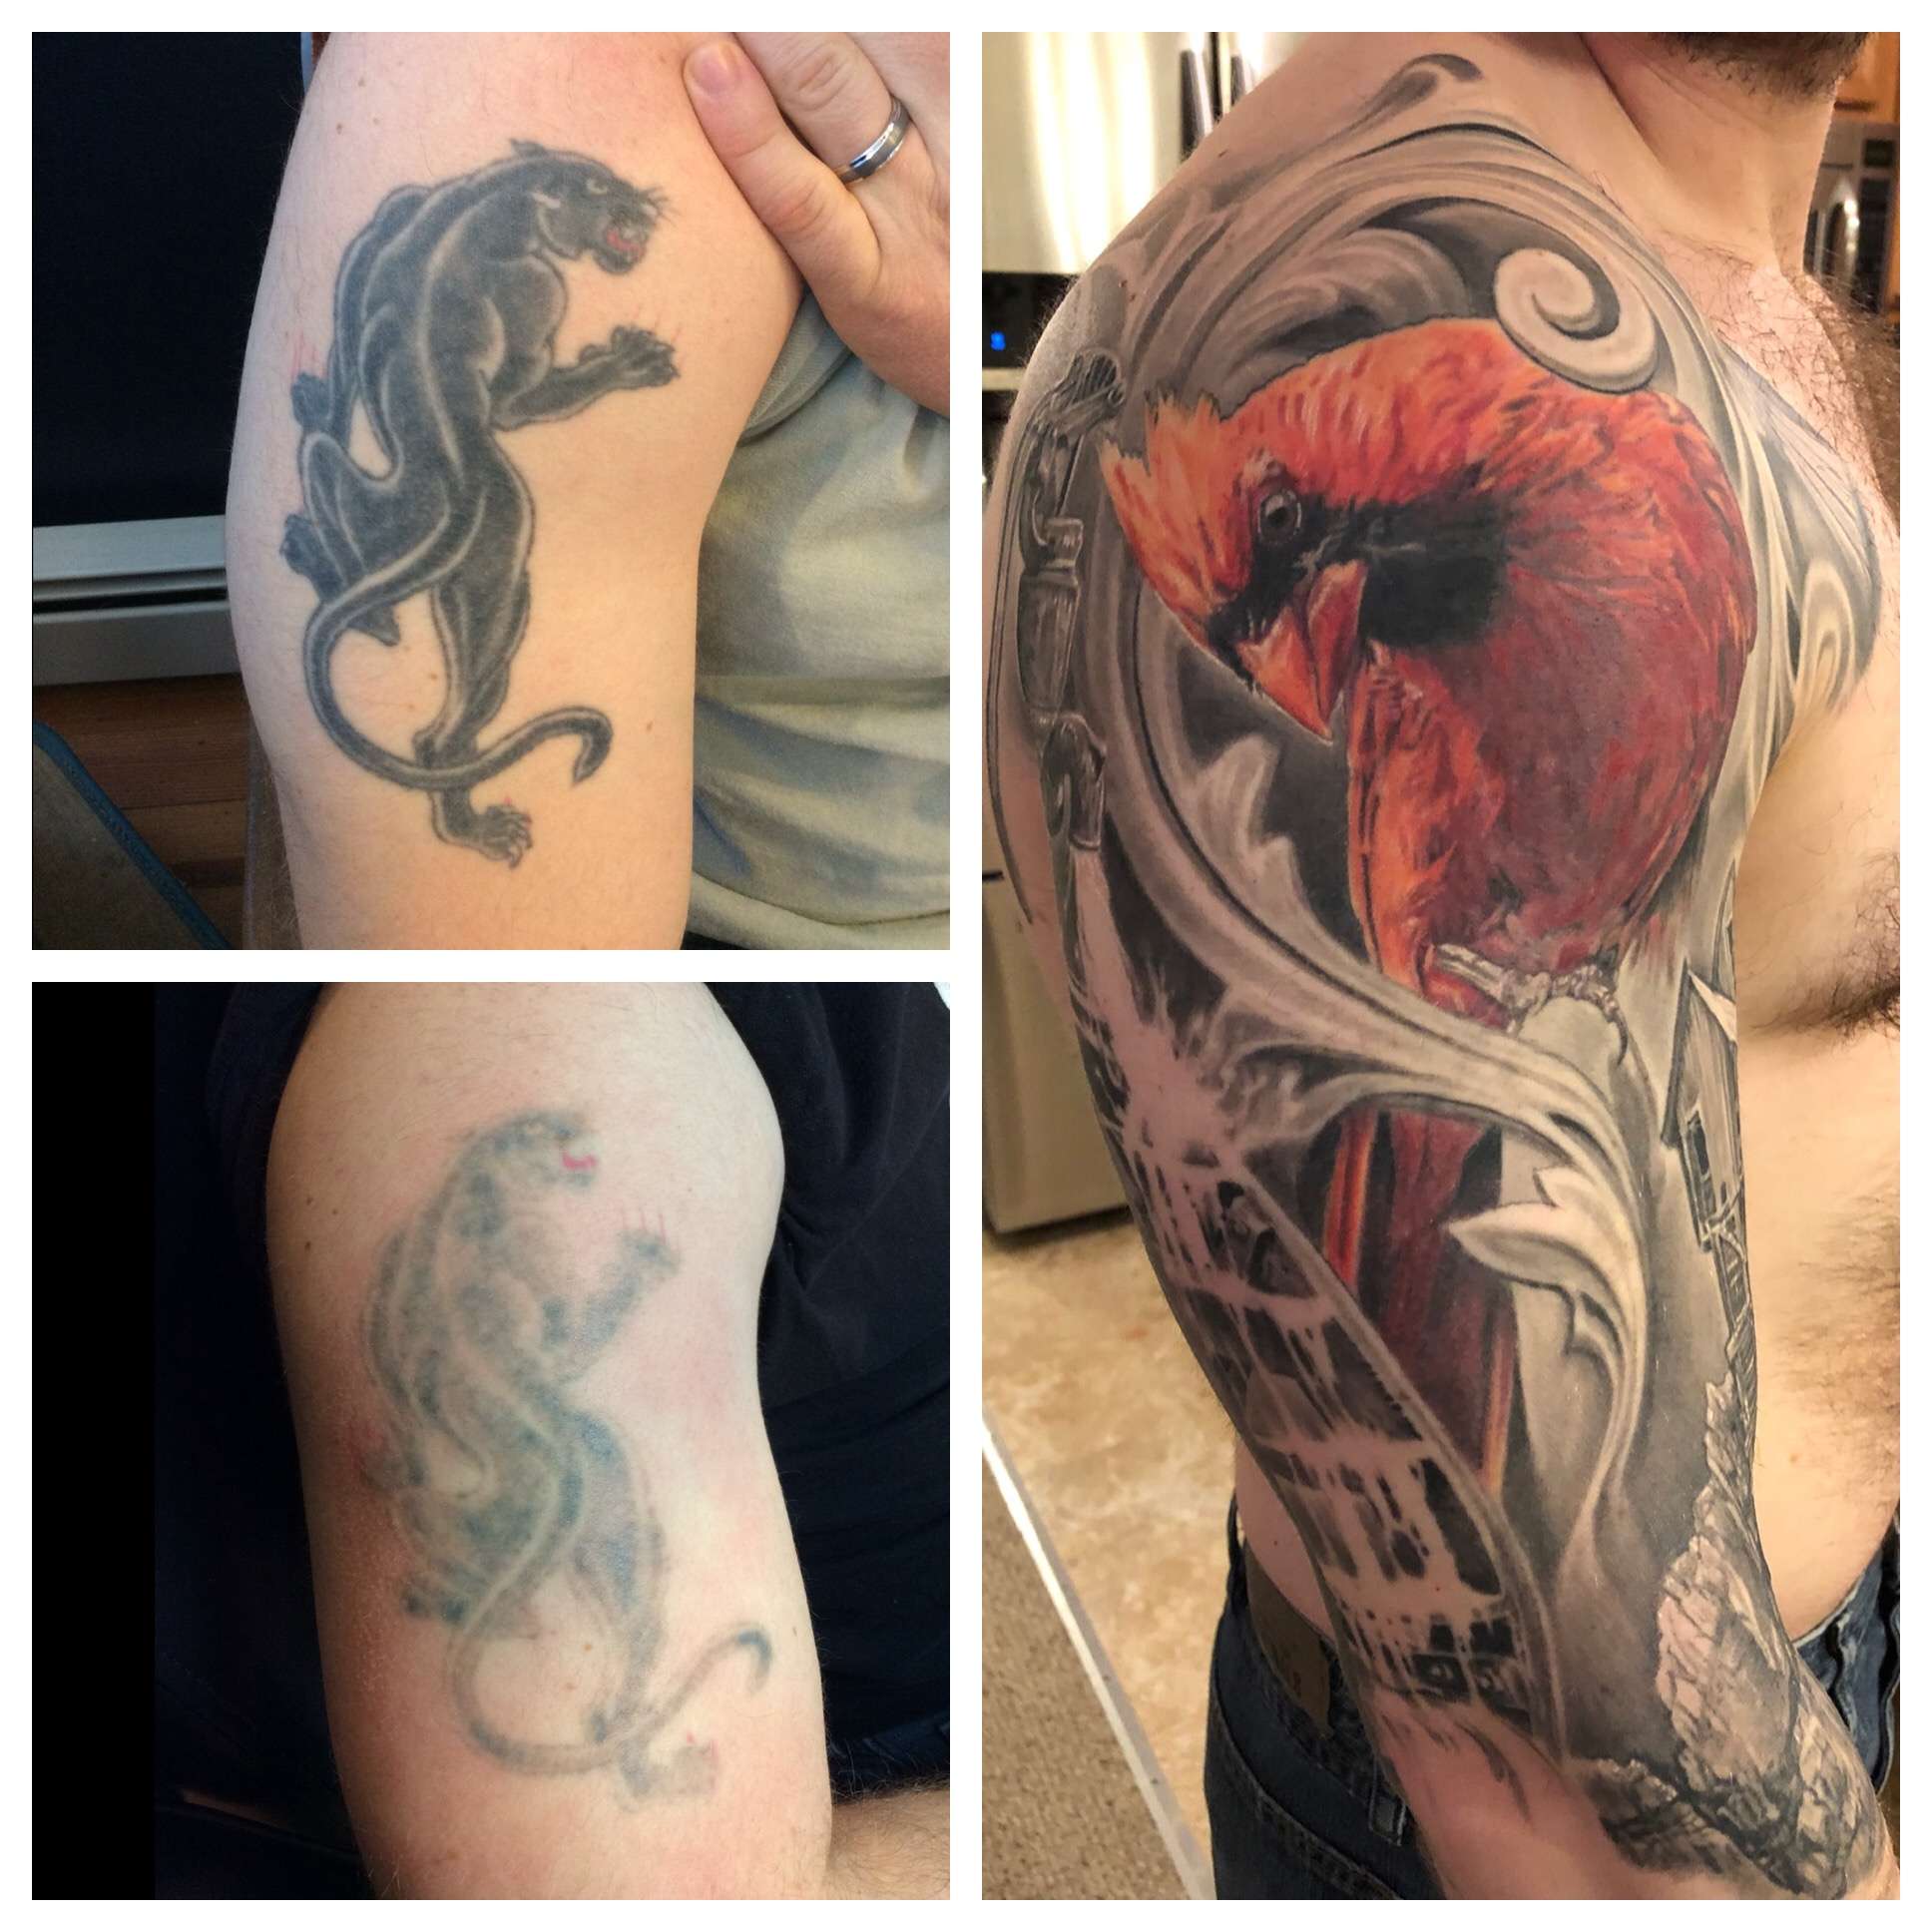 Tattoo Removal Before And After Photos At Disappearing Inc